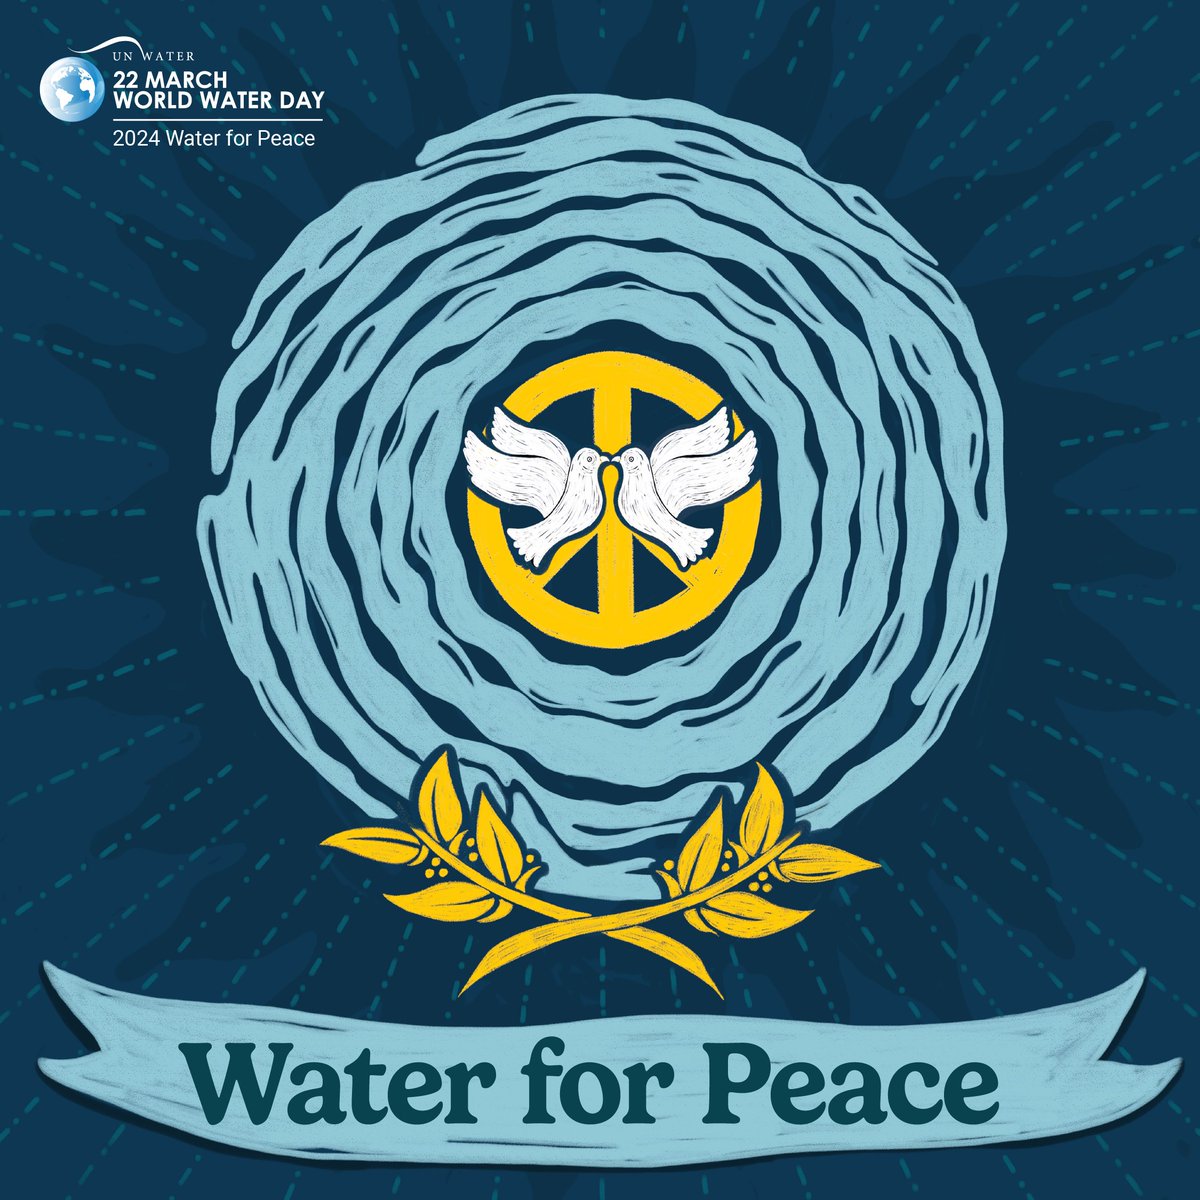 Happy World Water Day! Water can create peace or spark conflict. As a human right, we must balance everyone’s water needs. This #WorldWaterDay, let’s unite and use water to build a more peaceful future. worldwaterday.org #WWD2024